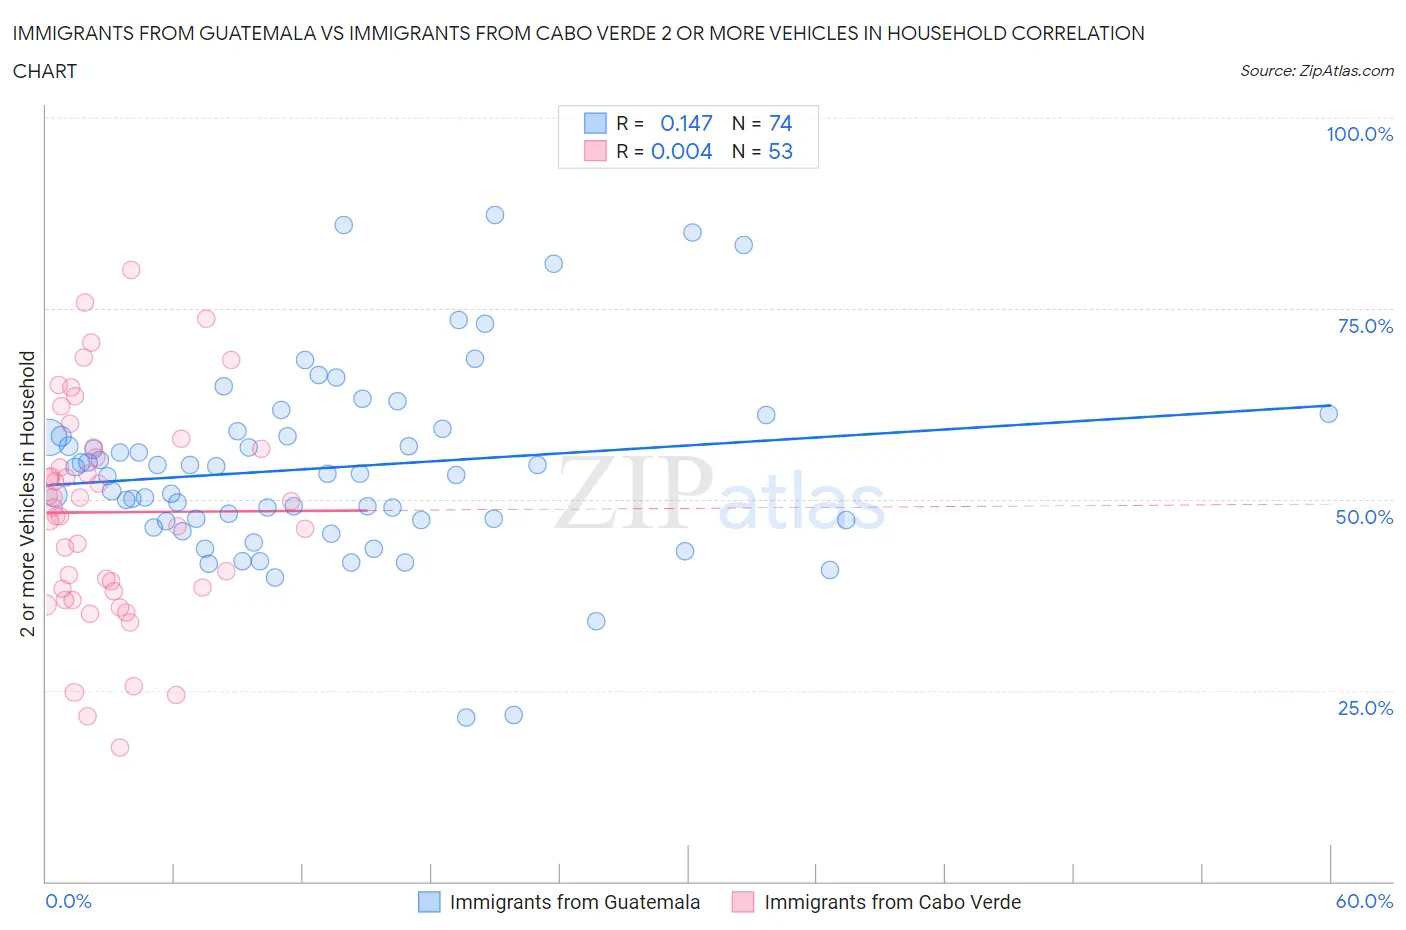 Immigrants from Guatemala vs Immigrants from Cabo Verde 2 or more Vehicles in Household